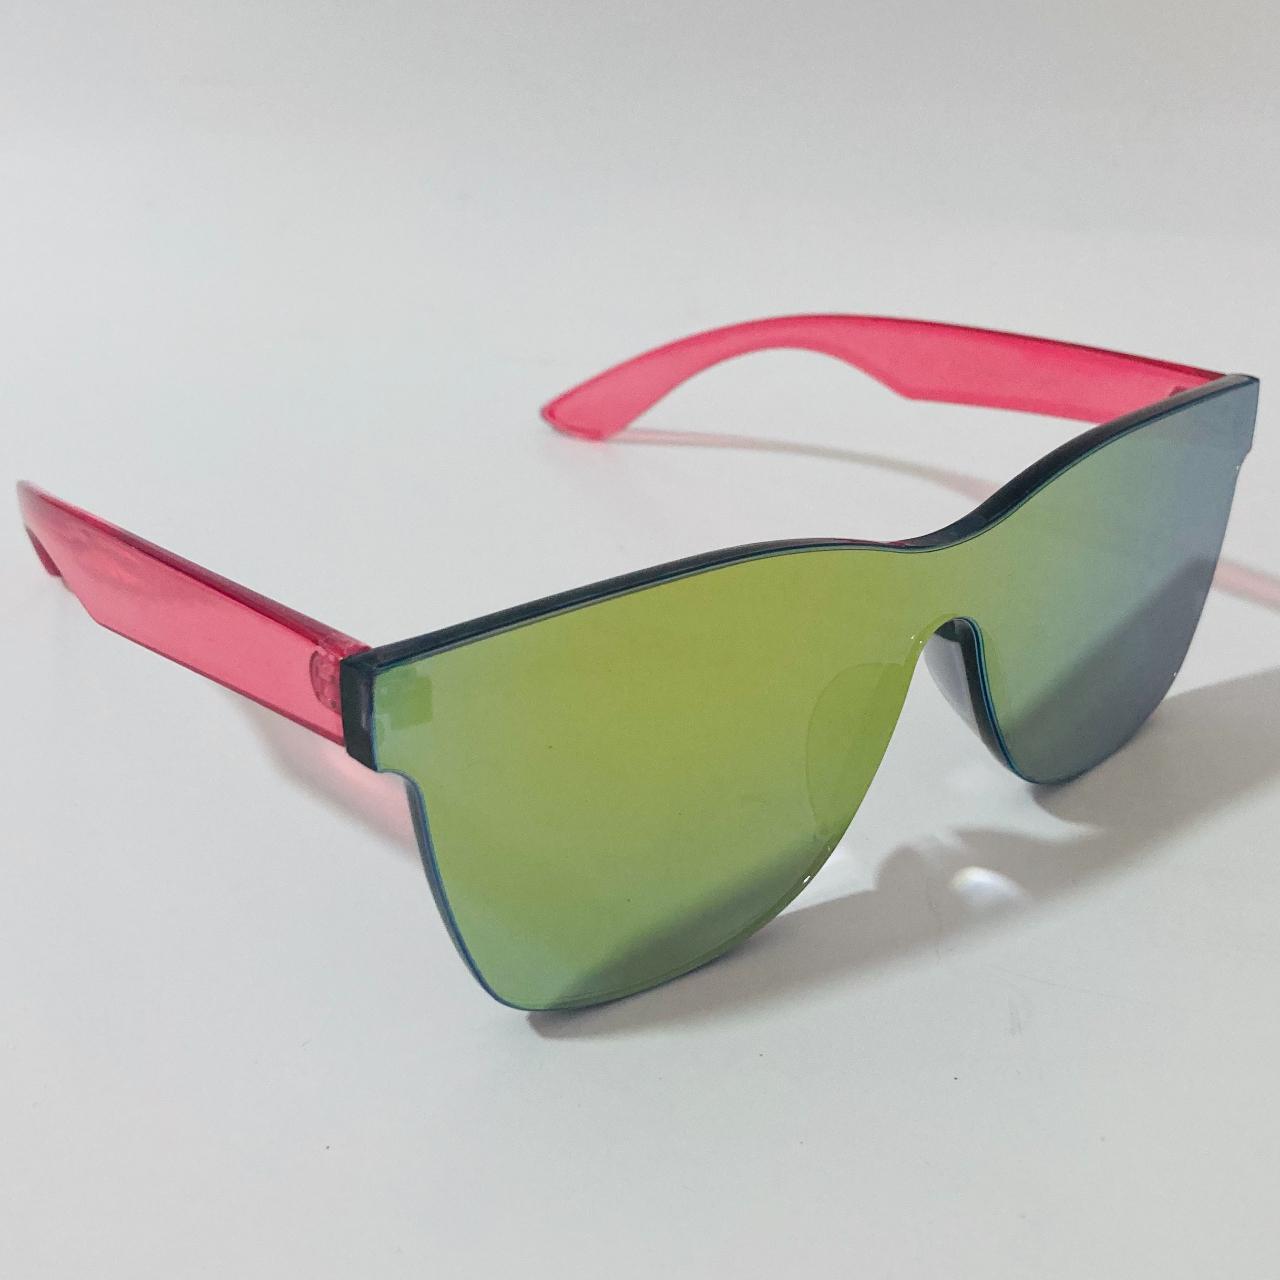 Men's Green and Pink Sunglasses (3)